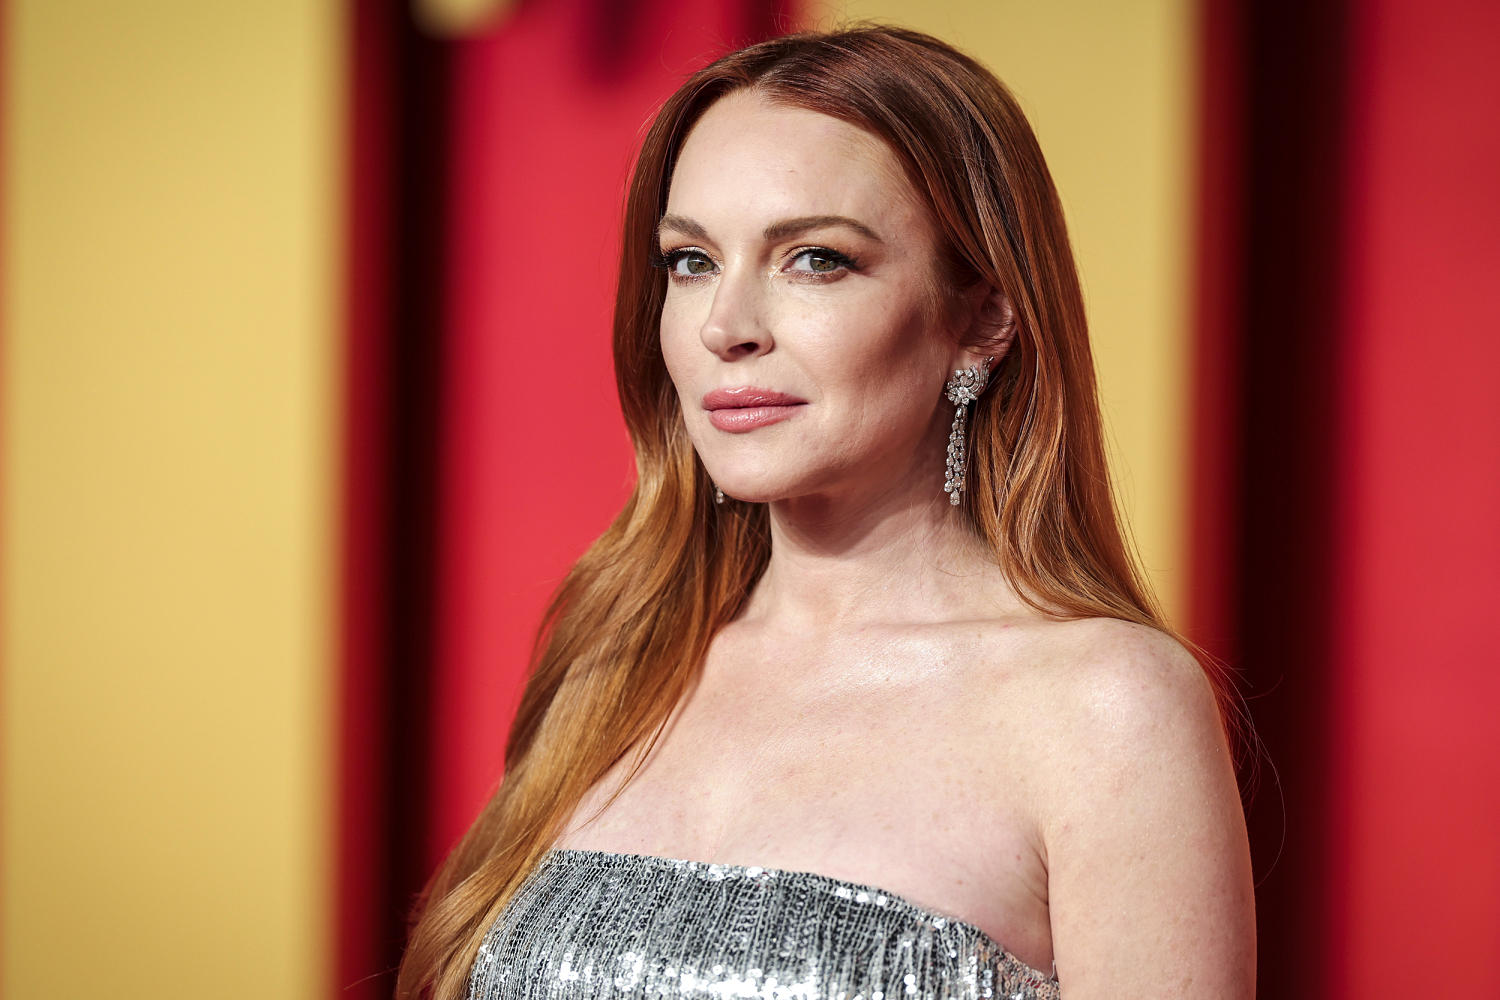 Sex tapes and Lindsay Lohan rehab records: Trump trial detours into tabloid scandals